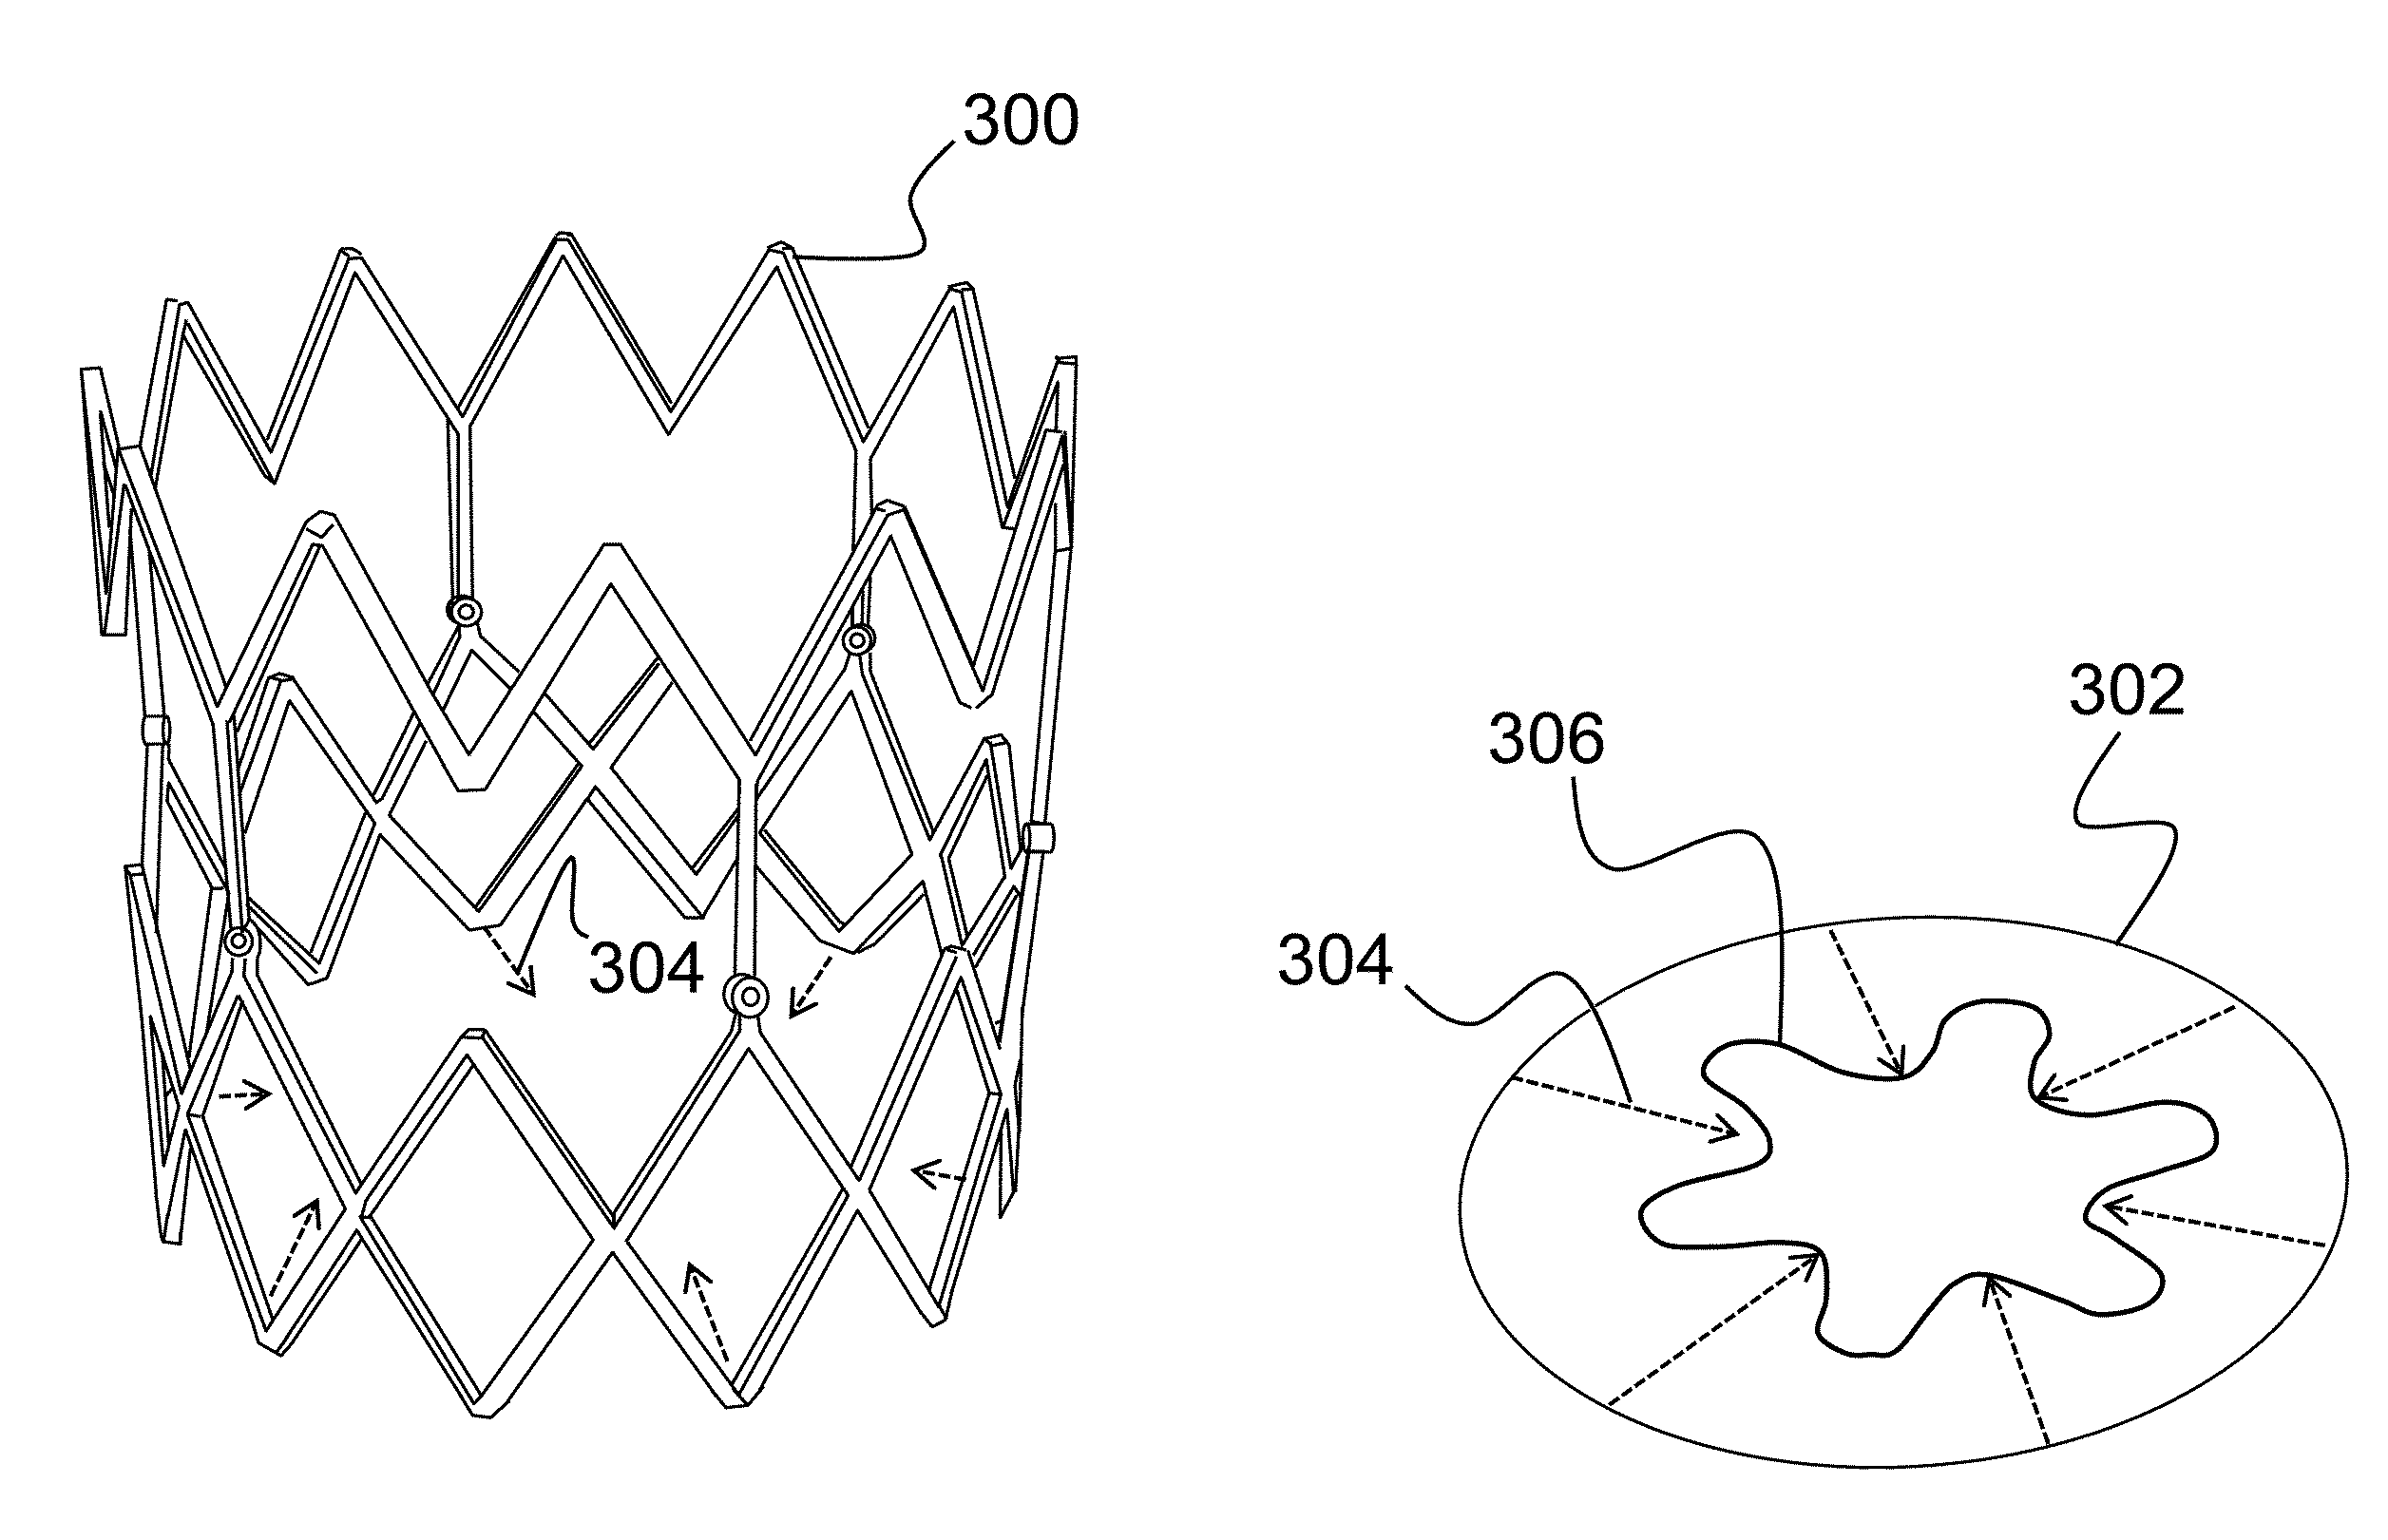 Expandable stent that collapses into a non-convex shape and expands into an expanded, convex shape